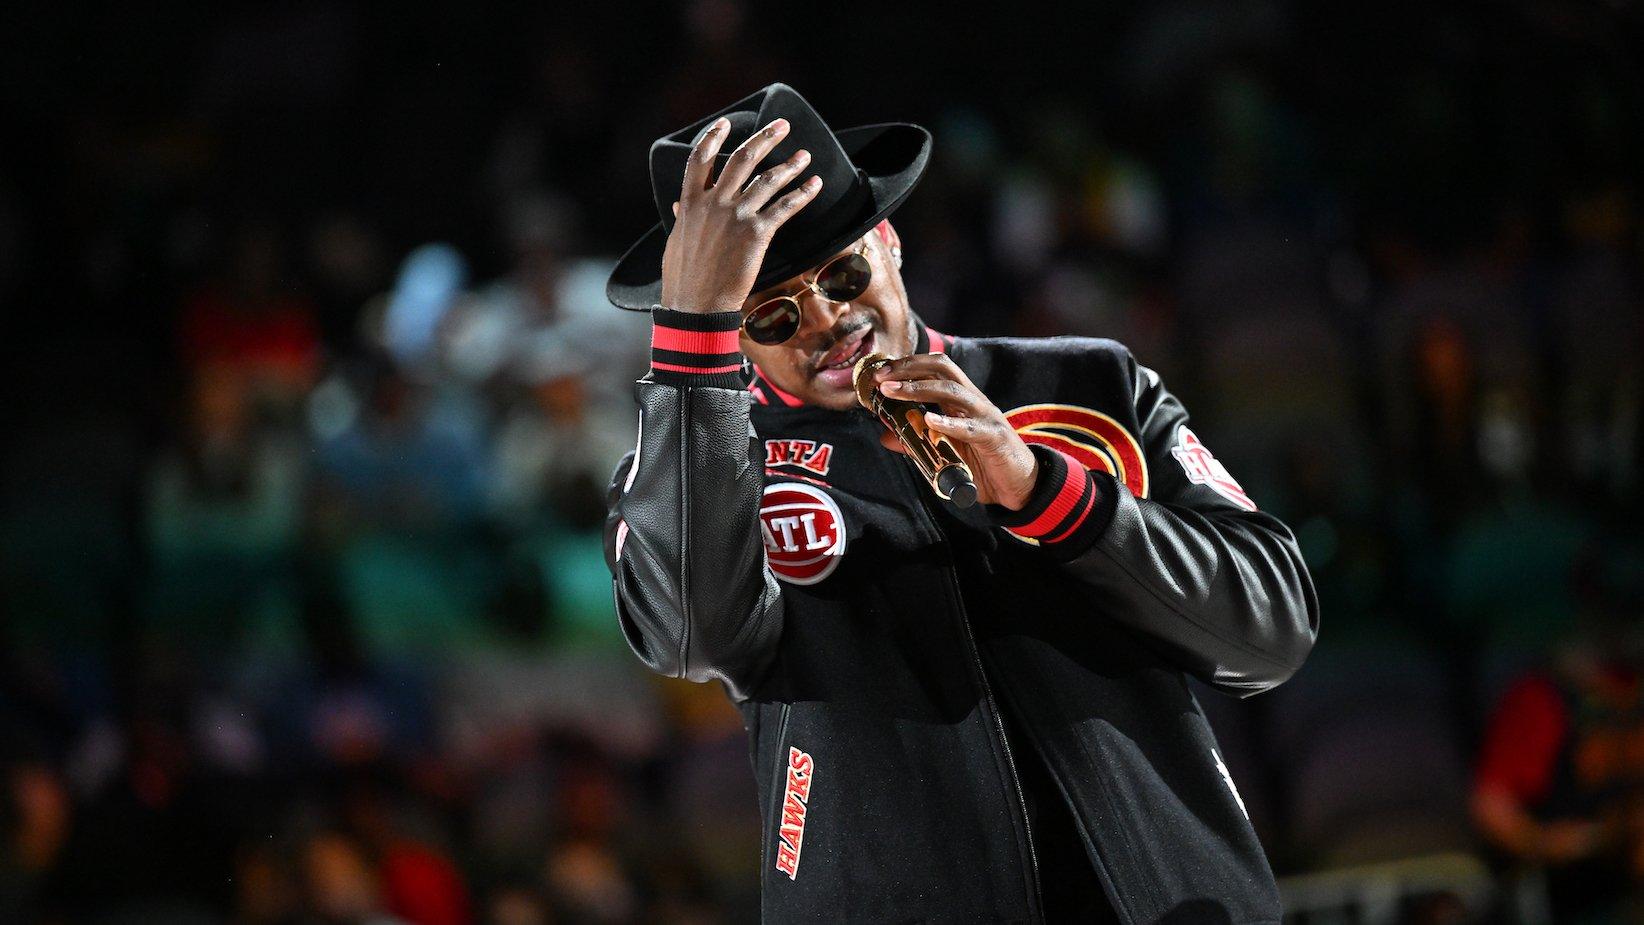 Ne-Yo performs onstage during halftime at the game between the Brooklyn Nets and the Atlanta Hawks at State Farm Arena on February 26, 2023 in Atlanta, Georgia